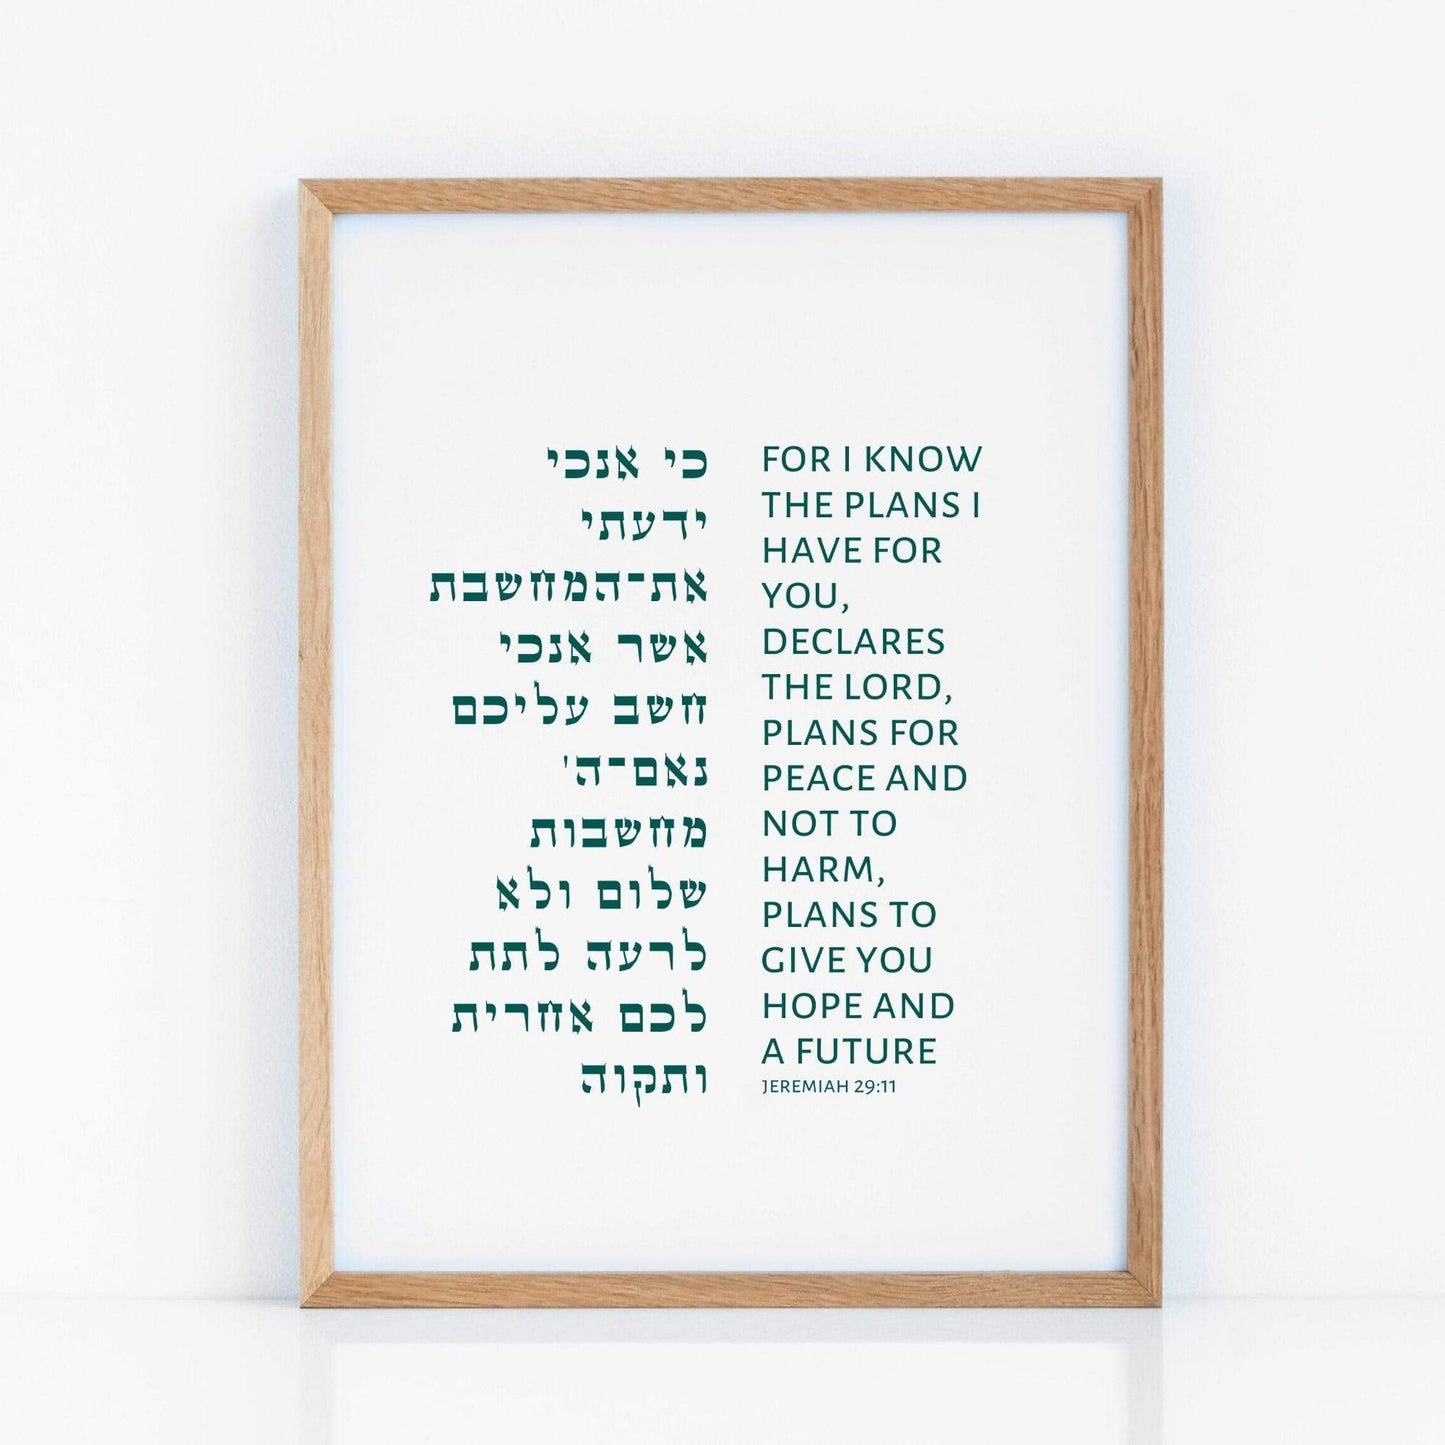 The Verse Jeremiah 29:11 Jeremiah 29:11 For I know the plans I have for you | Jewish Wall Art Gifts